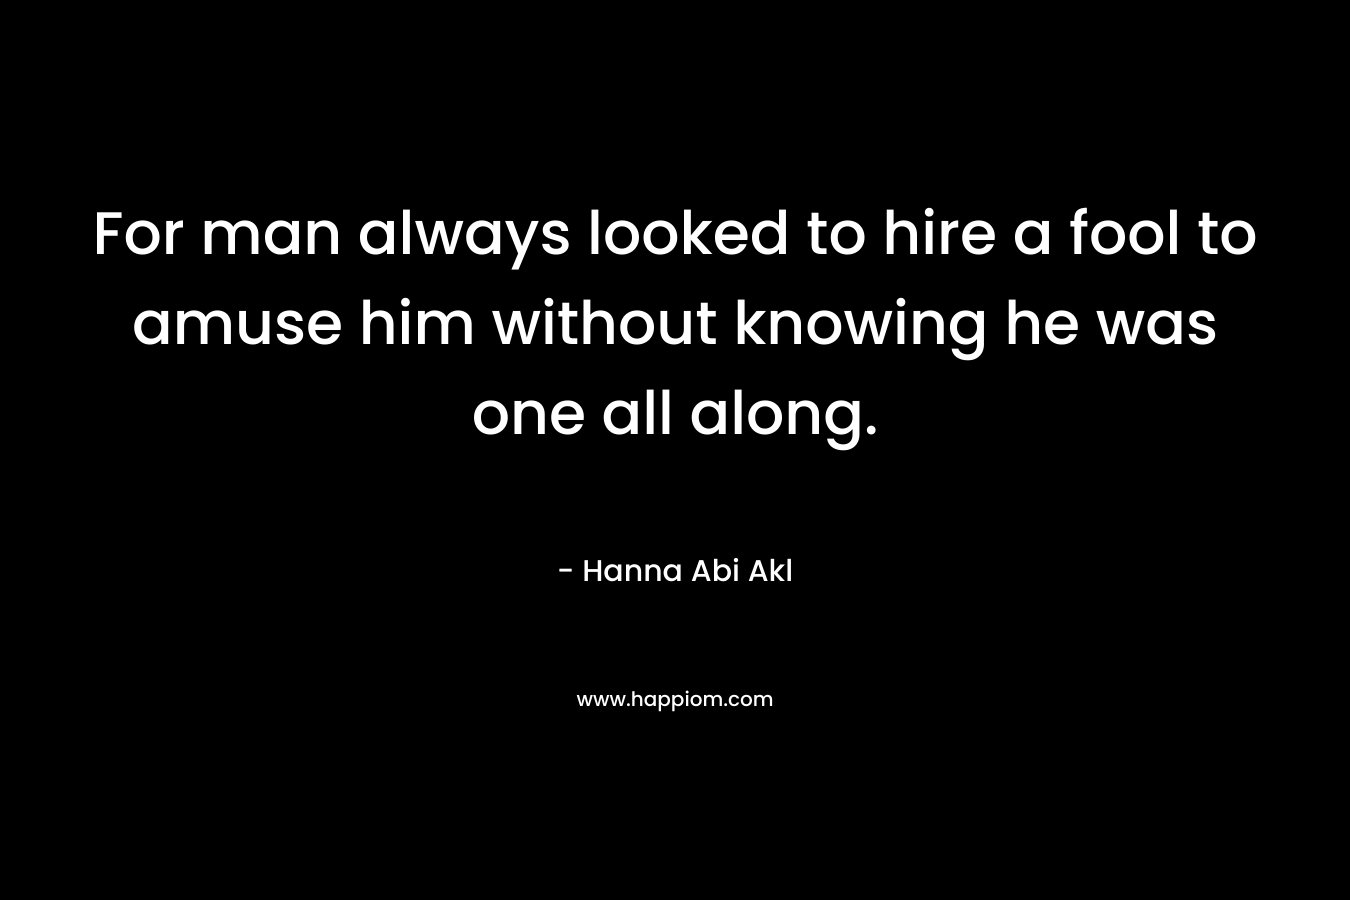 For man always looked to hire a fool to amuse him without knowing he was one all along.